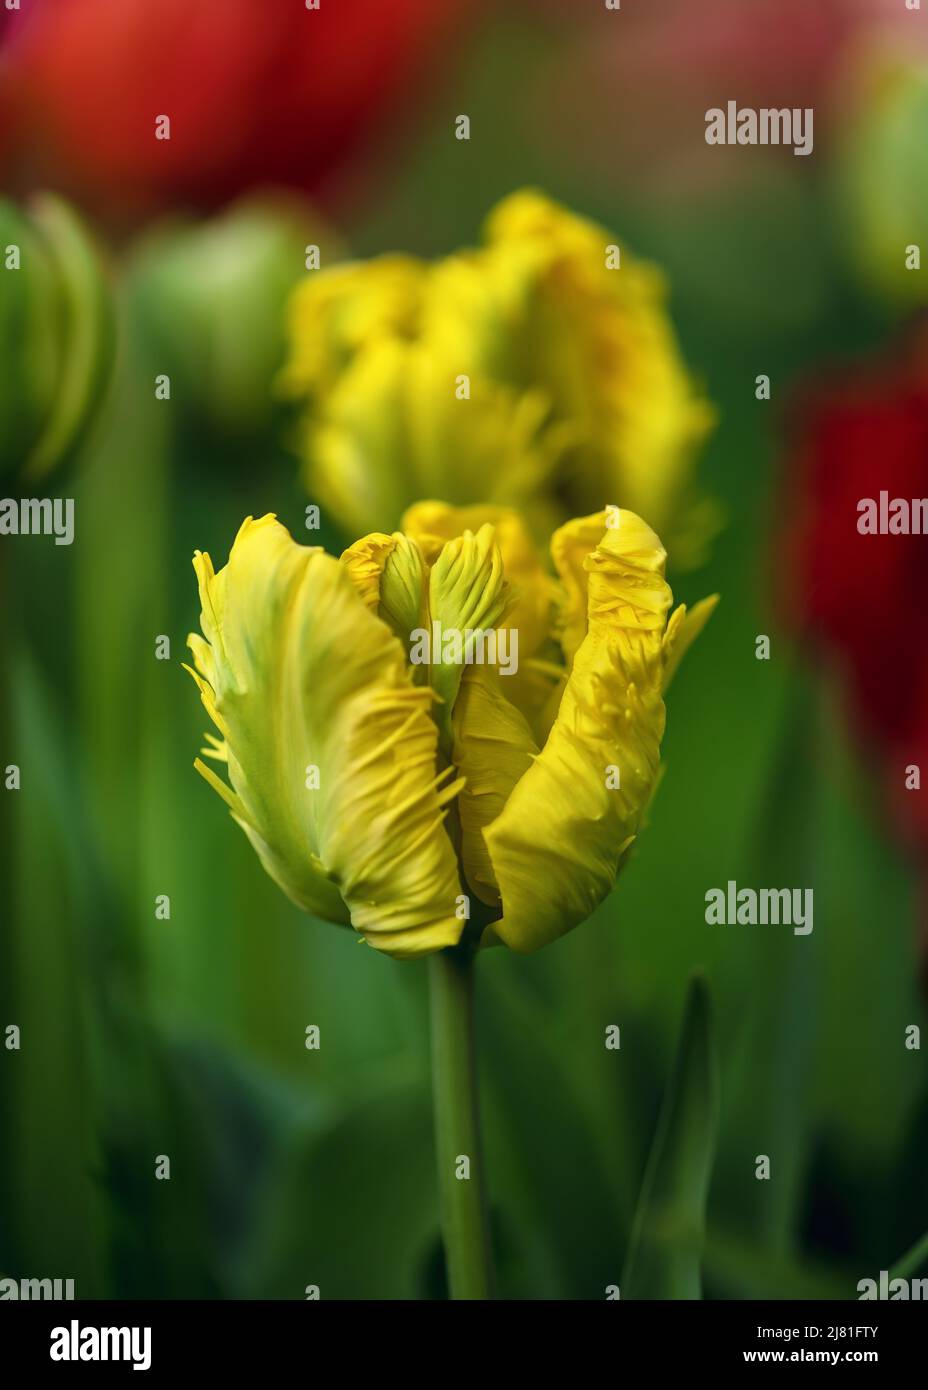 Beautiful yellow tulip flowers with their ruffled and feathered petals in spring garden with blurred background. Parrot tulips. Stock Photo